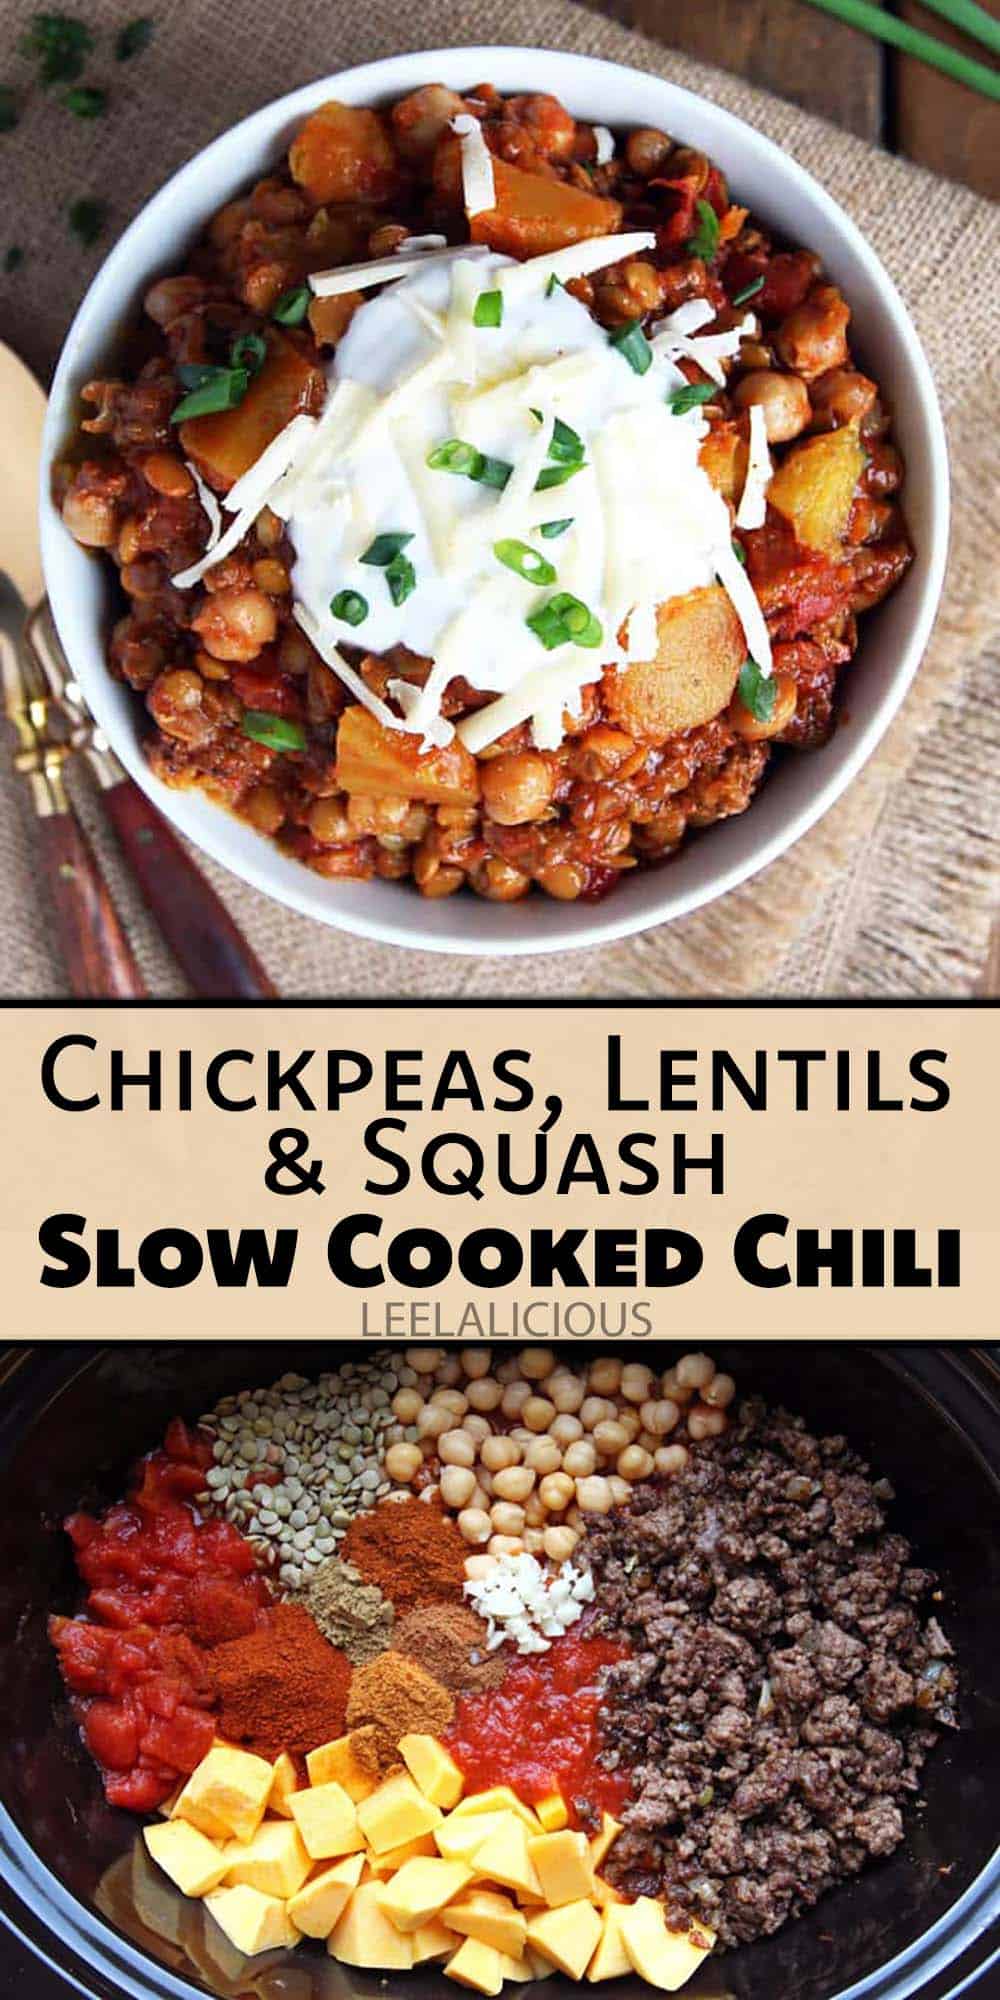 Slow Cooked Chili with Chickpeas Lentils + Squash